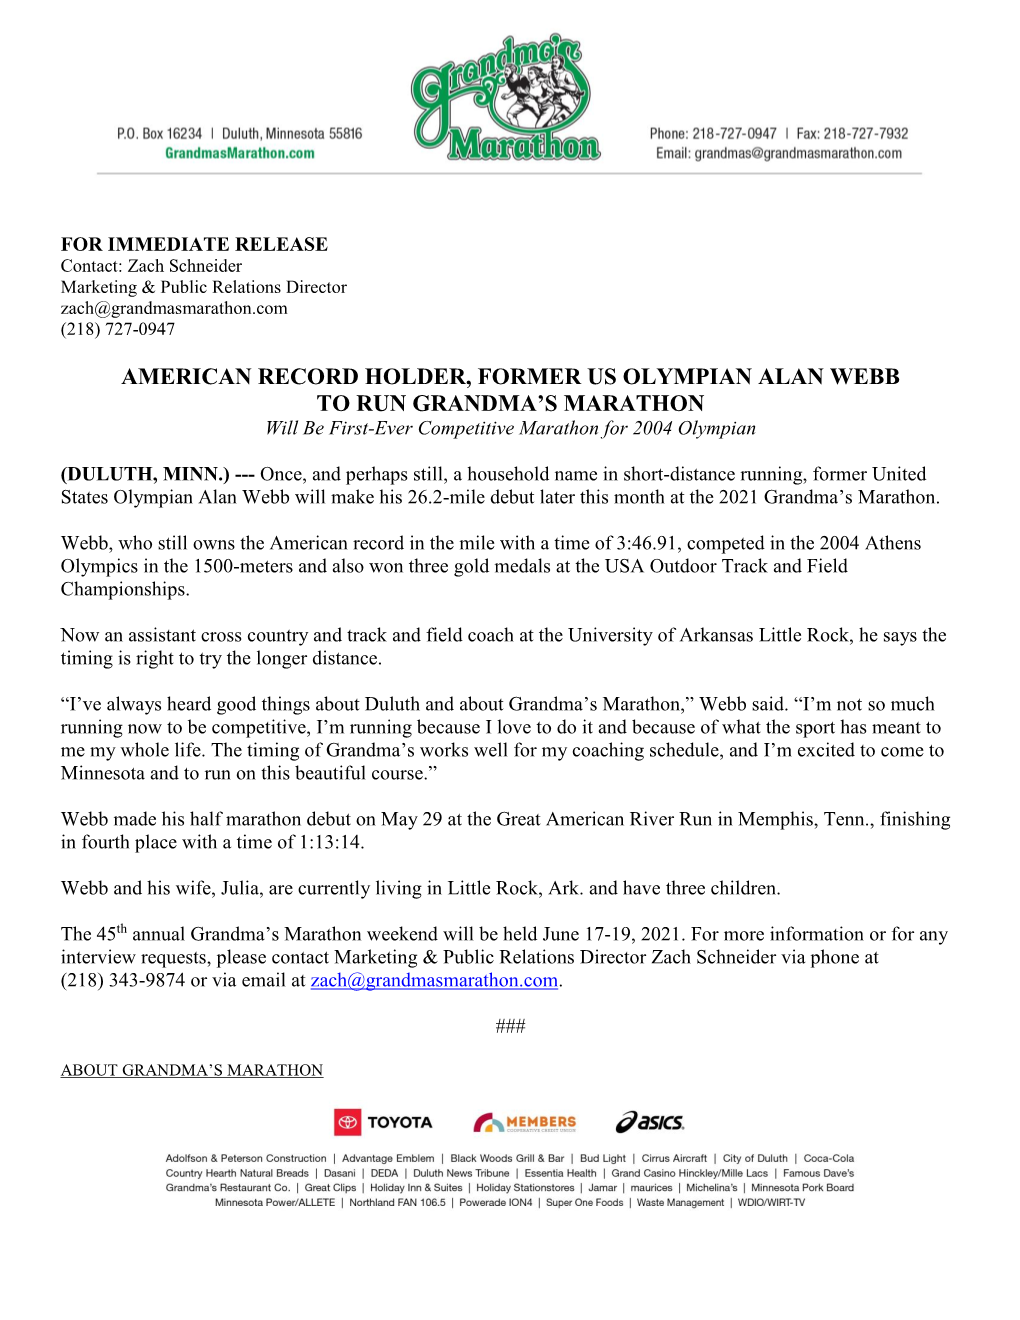 AMERICAN RECORD HOLDER, FORMER US OLYMPIAN ALAN WEBB to RUN GRANDMA’S MARATHON Will Be First-Ever Competitive Marathon for 2004 Olympian